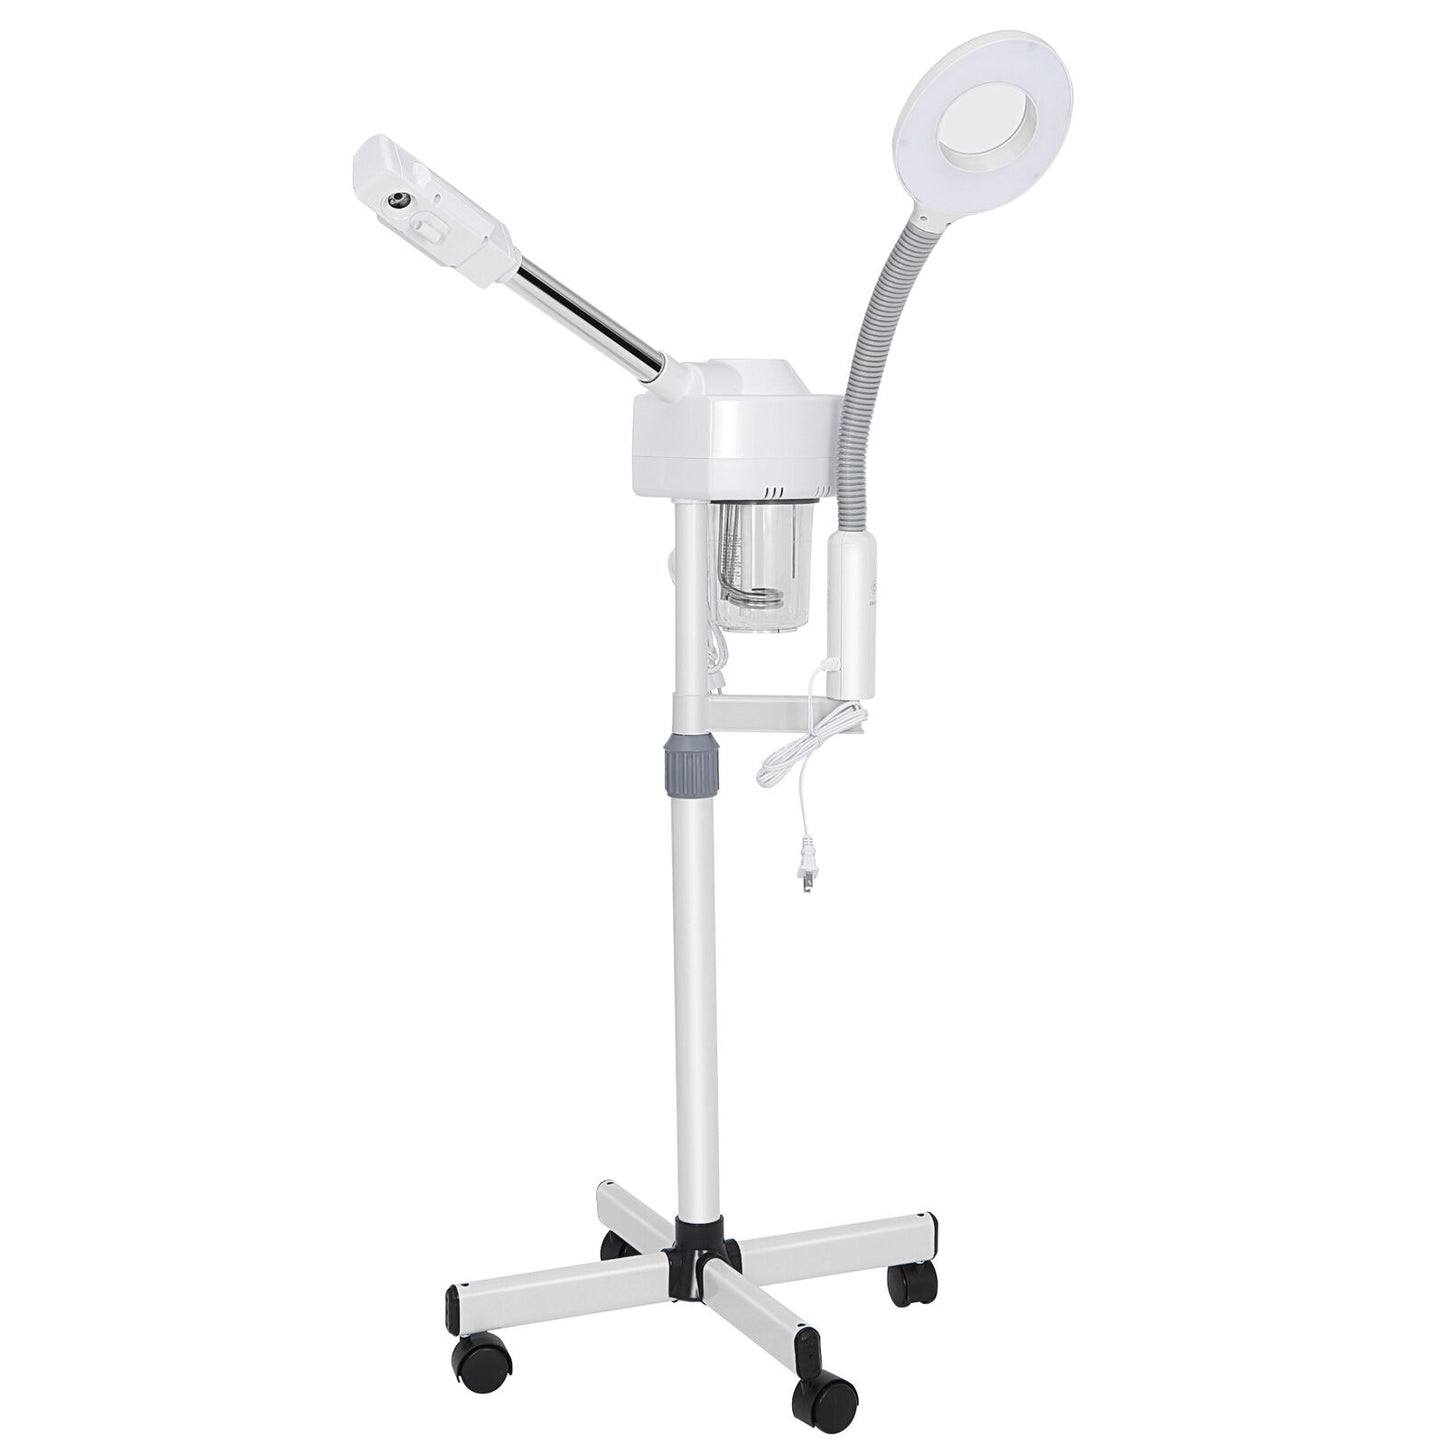 2In1 Facial Steamer 5x Clamp Magnifying Lamp Hot Ozone Machine Spa Salon Beauty